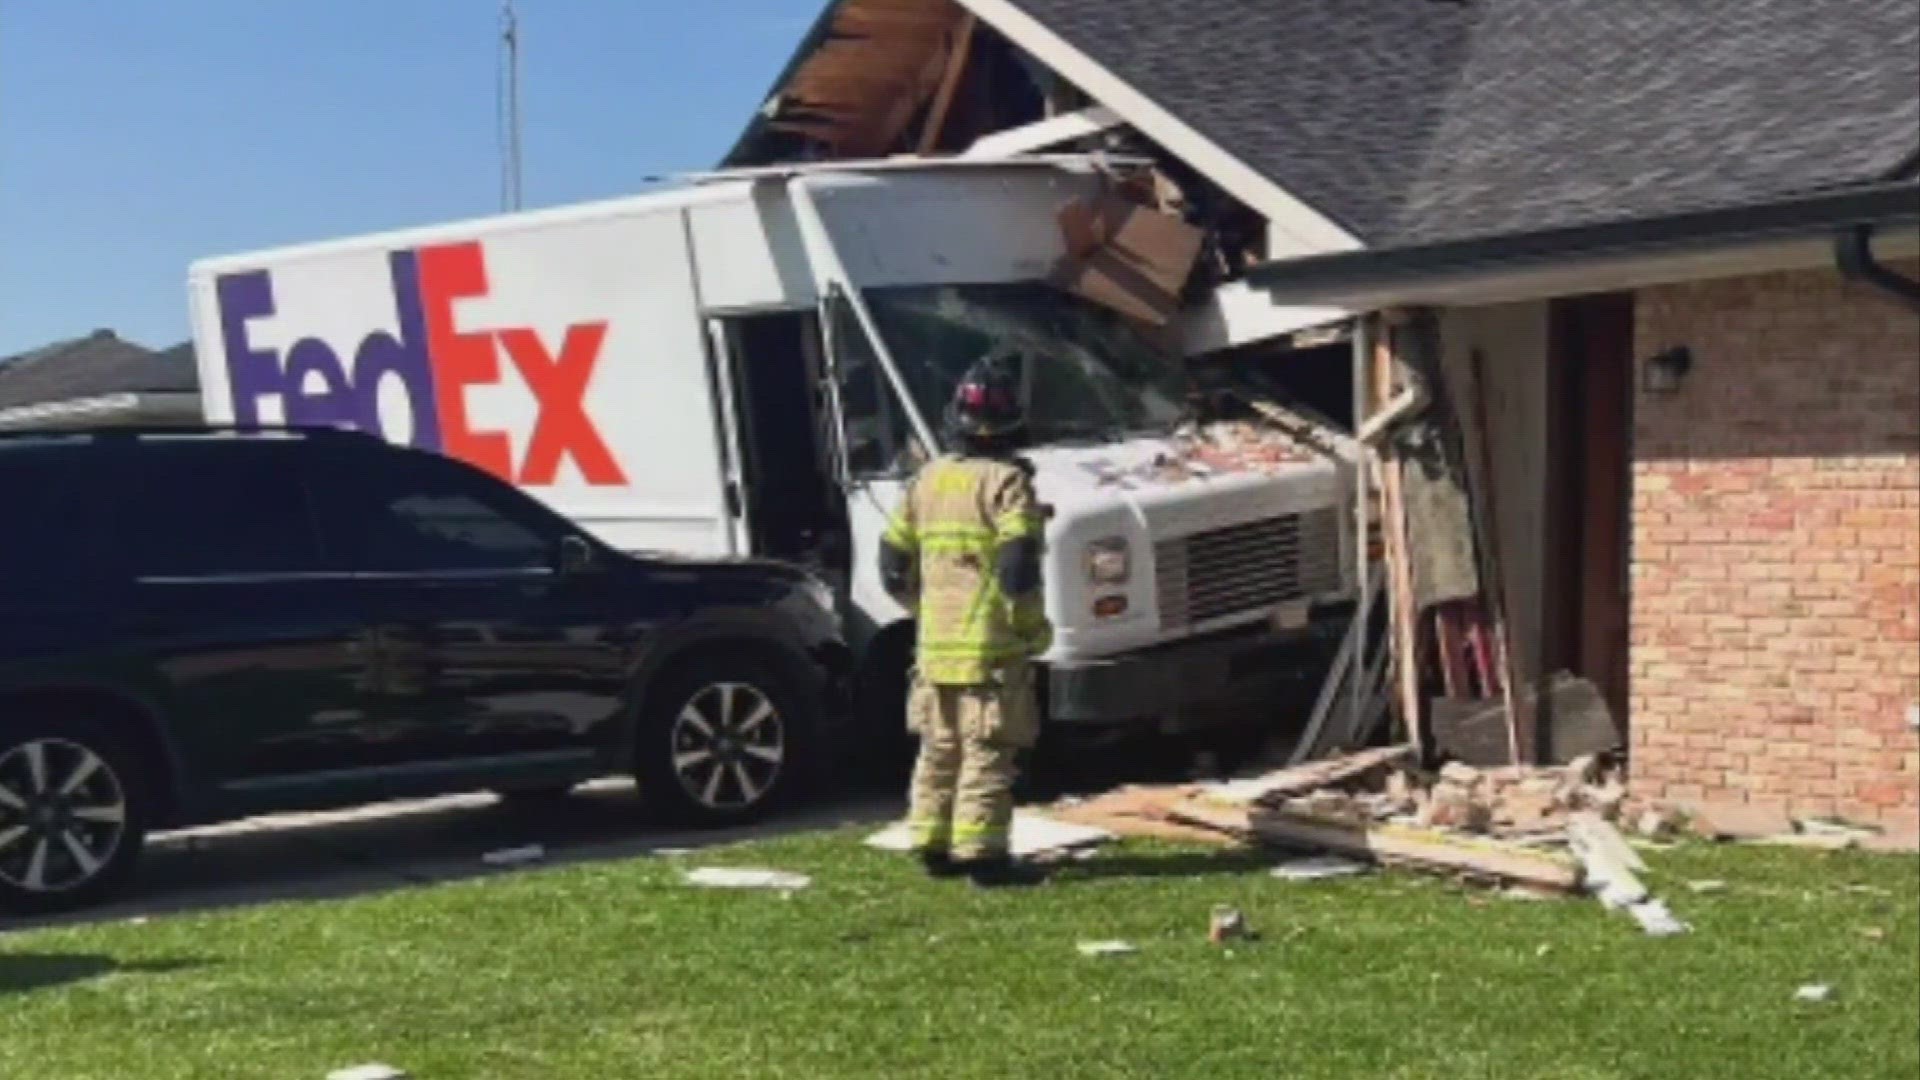 WWL Louisiana has obtained a wild video of a FedEx van being driven into a home in Houma, La., on Tuesday.